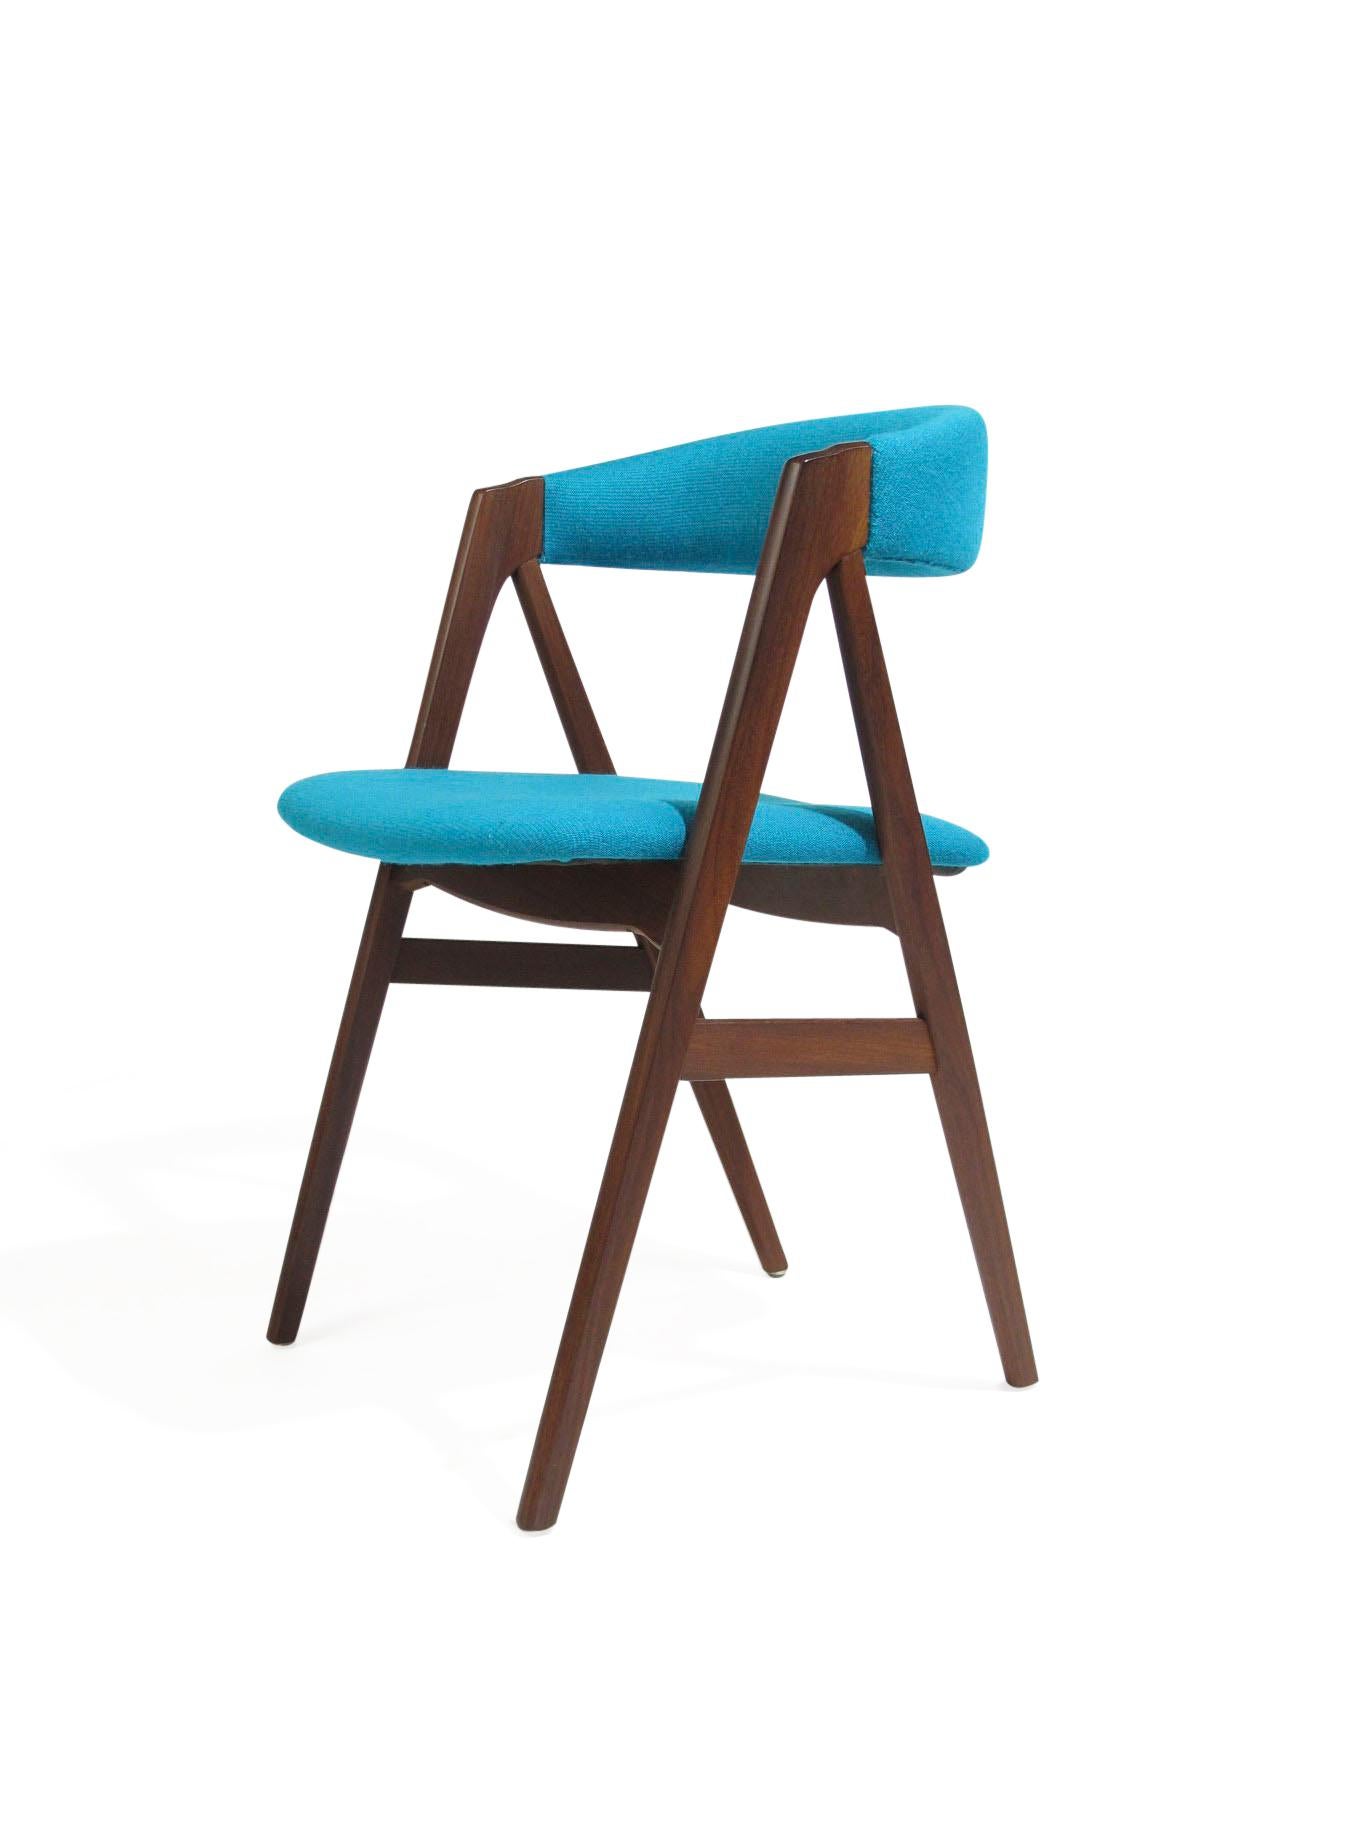 Four midcentury dark teak dining chairs with comfortable curved backrest on a sturdy teak A-frame. Newly upholstered in a high-quality turquoise aqua blue wool textile over new foam. The wood has been professionally restored and in excellent